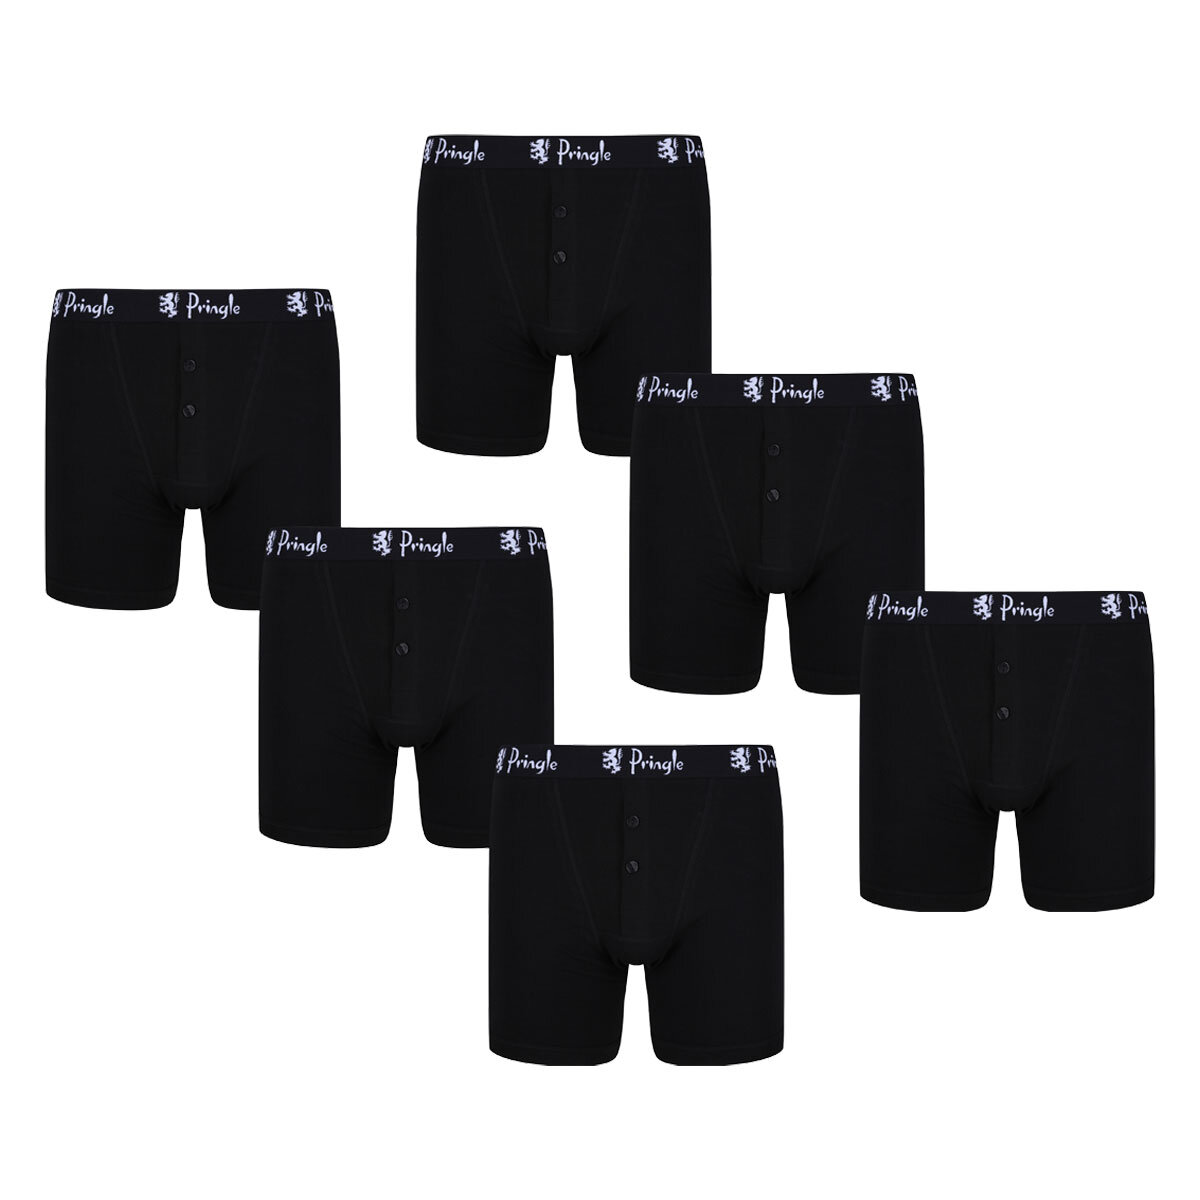 Pringle 2 x 3 Pack William Men's Button Boxer Shorts in B...